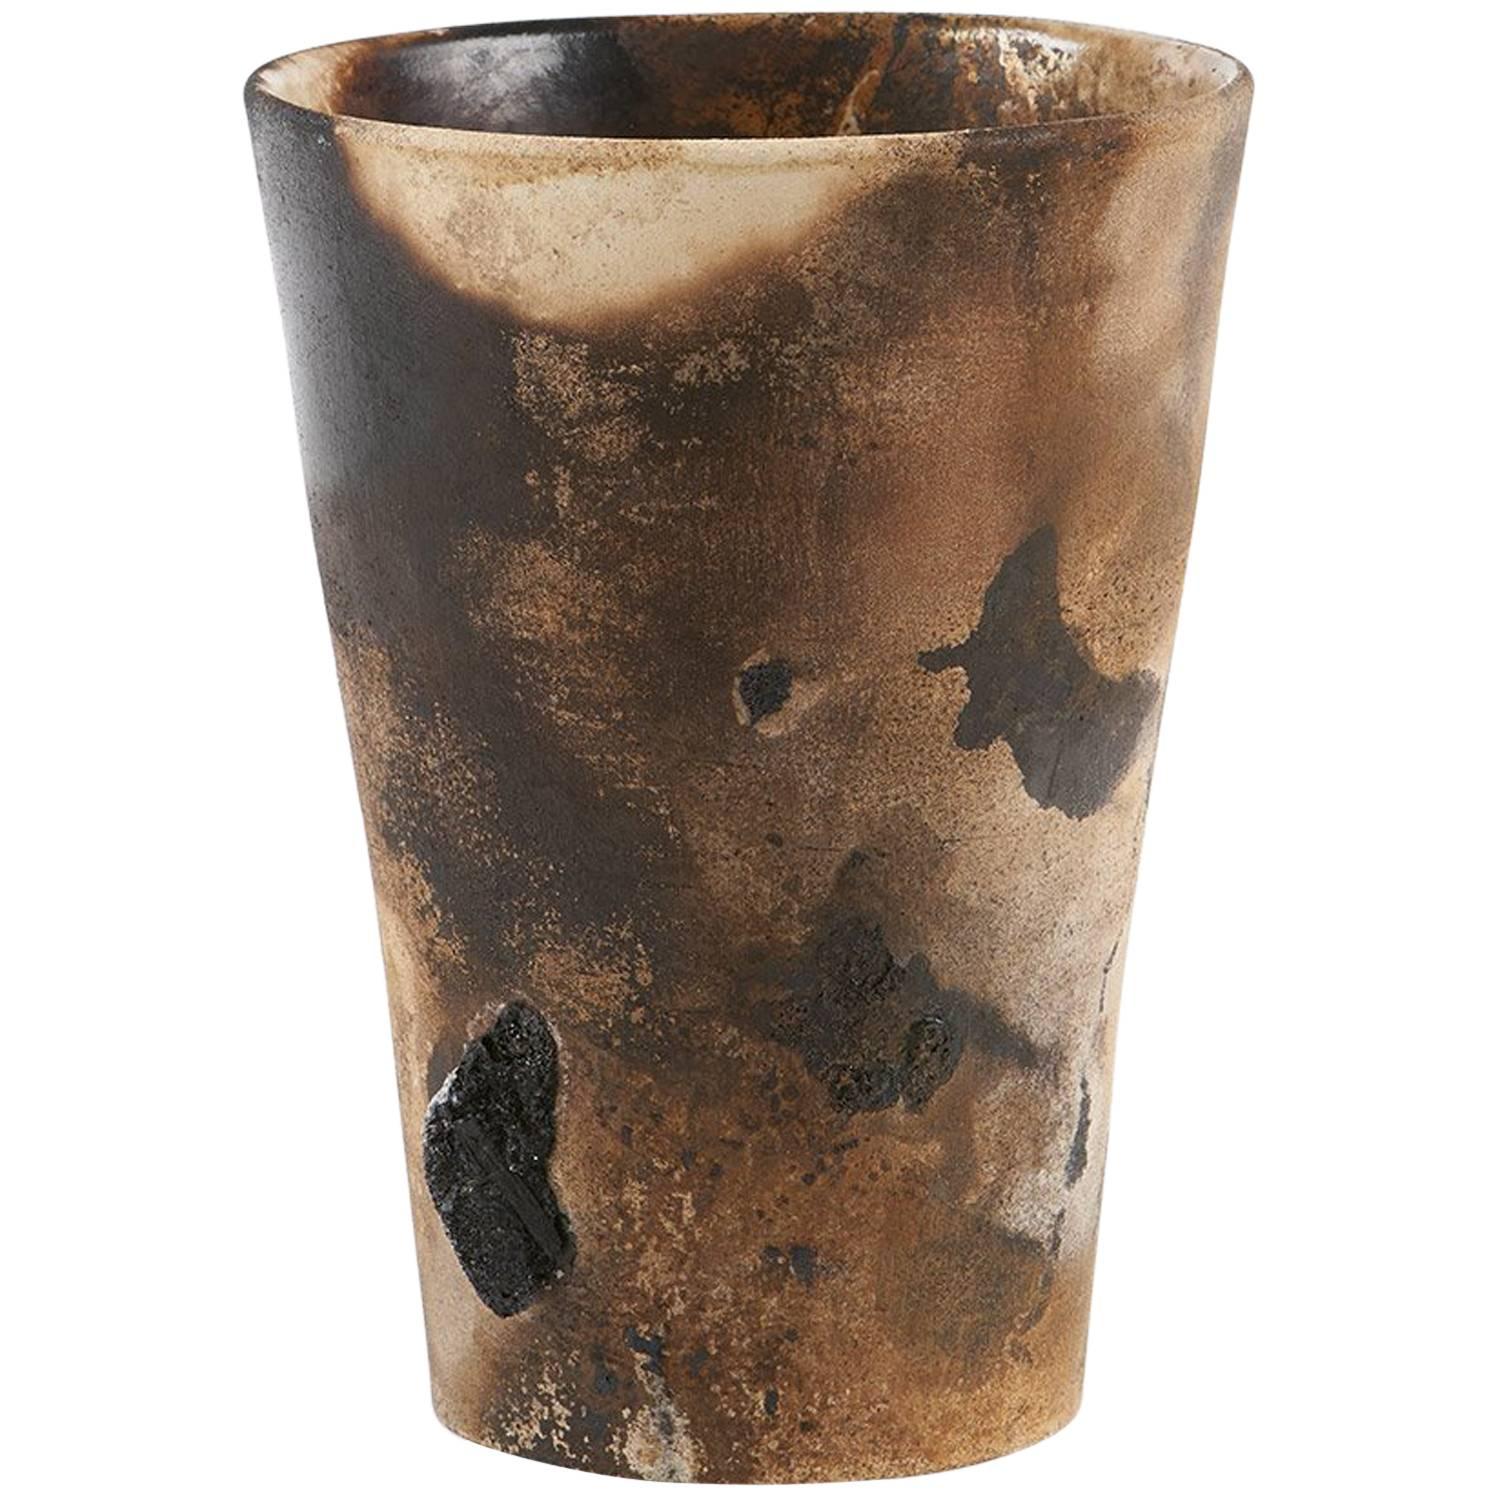 Fire-Smoked Ceramic Pottery From Ryan McDonald Vase #1 For Sale